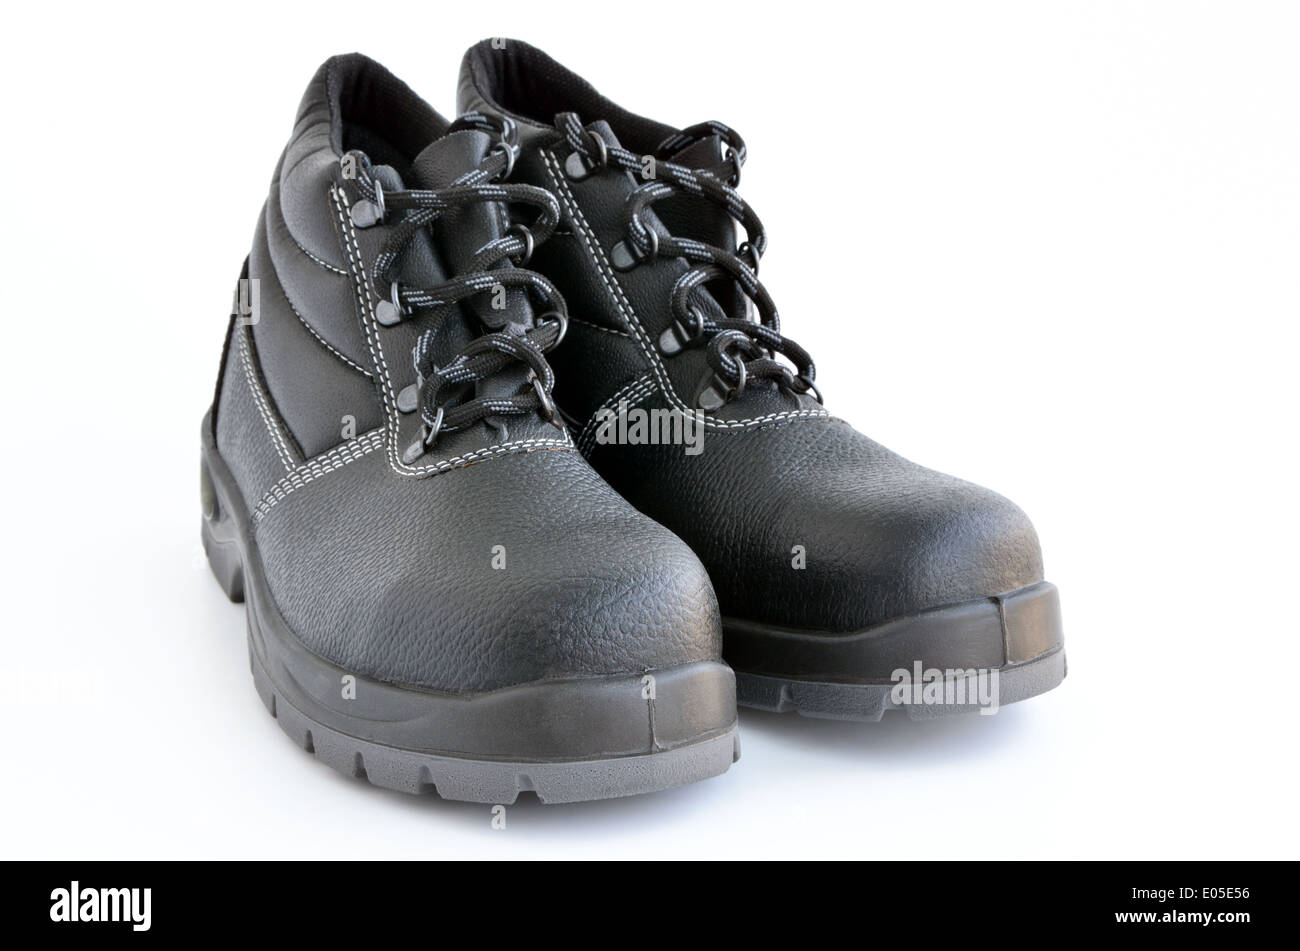 Safety Footwear High Resolution Stock Photography and Images - Alamy